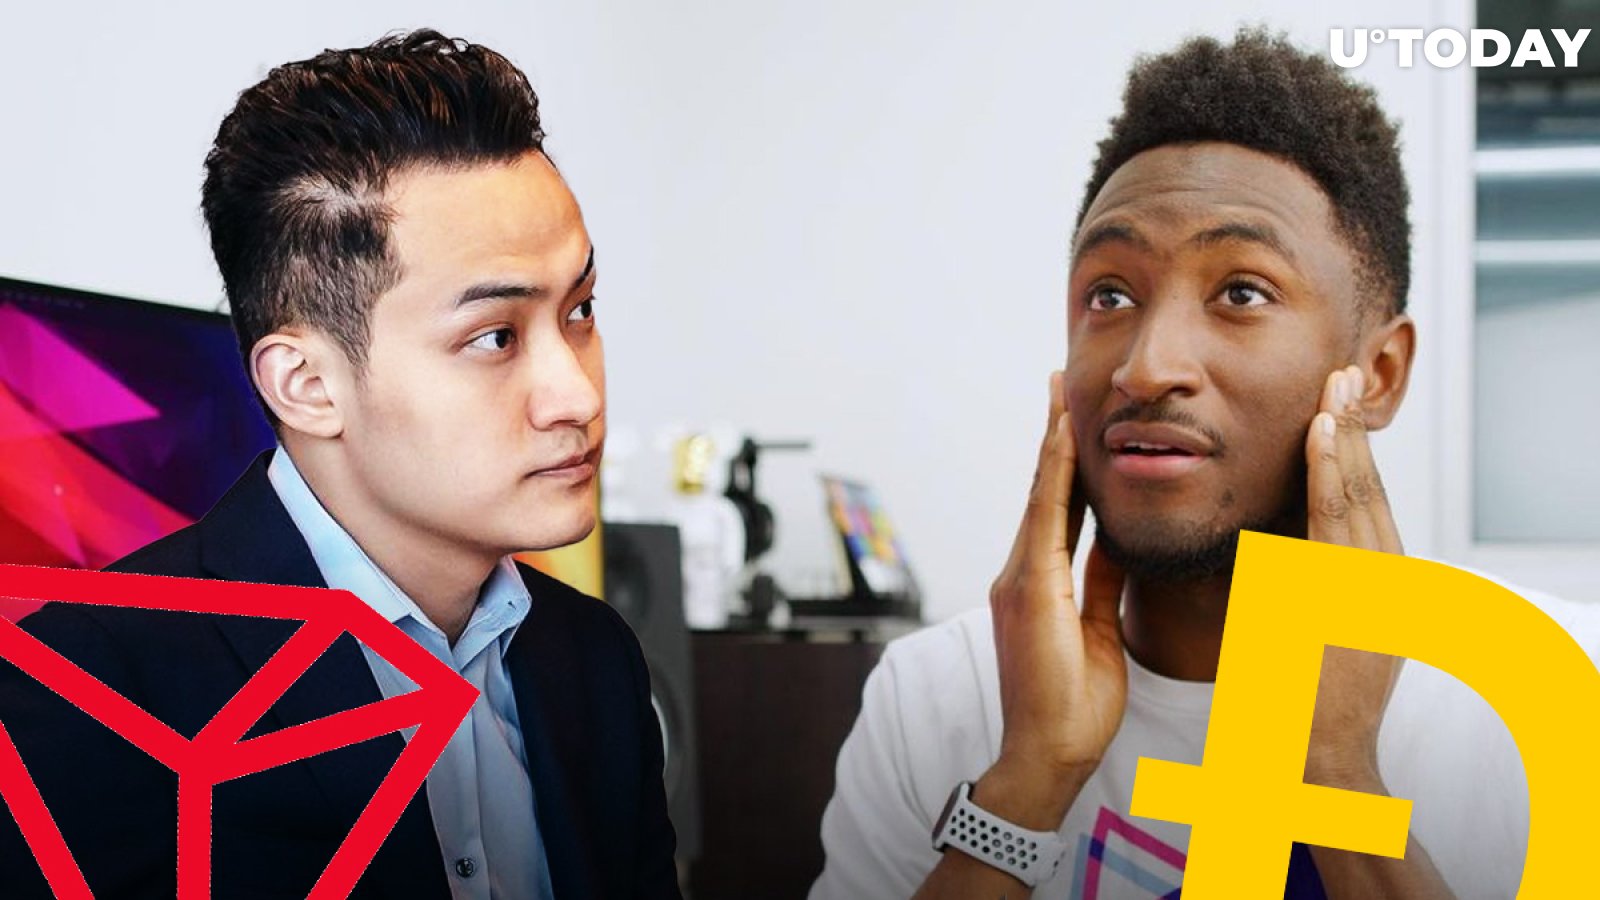 YouTube Celebrity MKBHD Explains DOGE, Shares Email Offering Him to Shill Tron for Payment